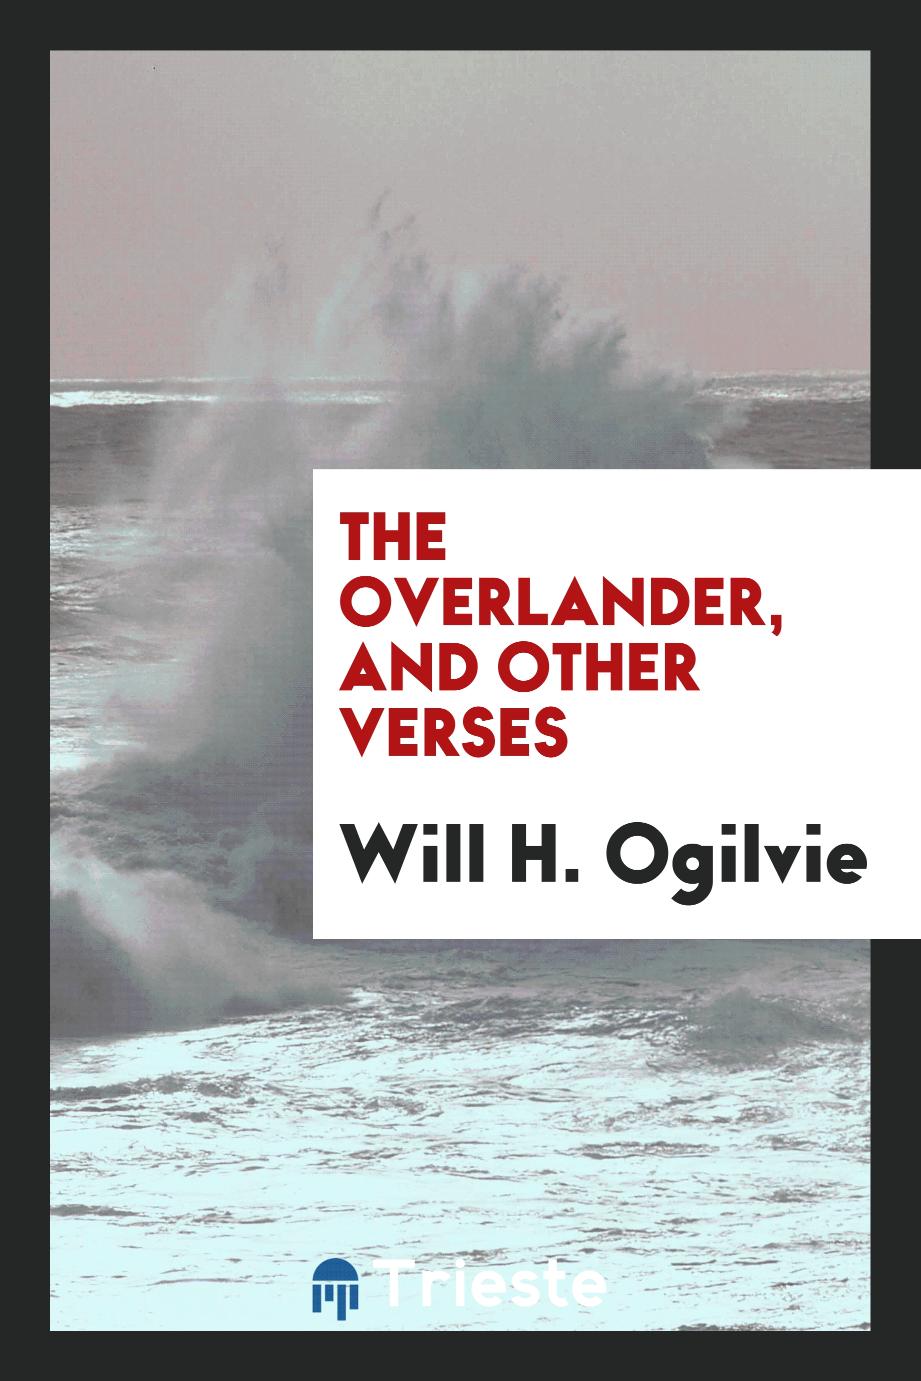 The overlander, and other verses